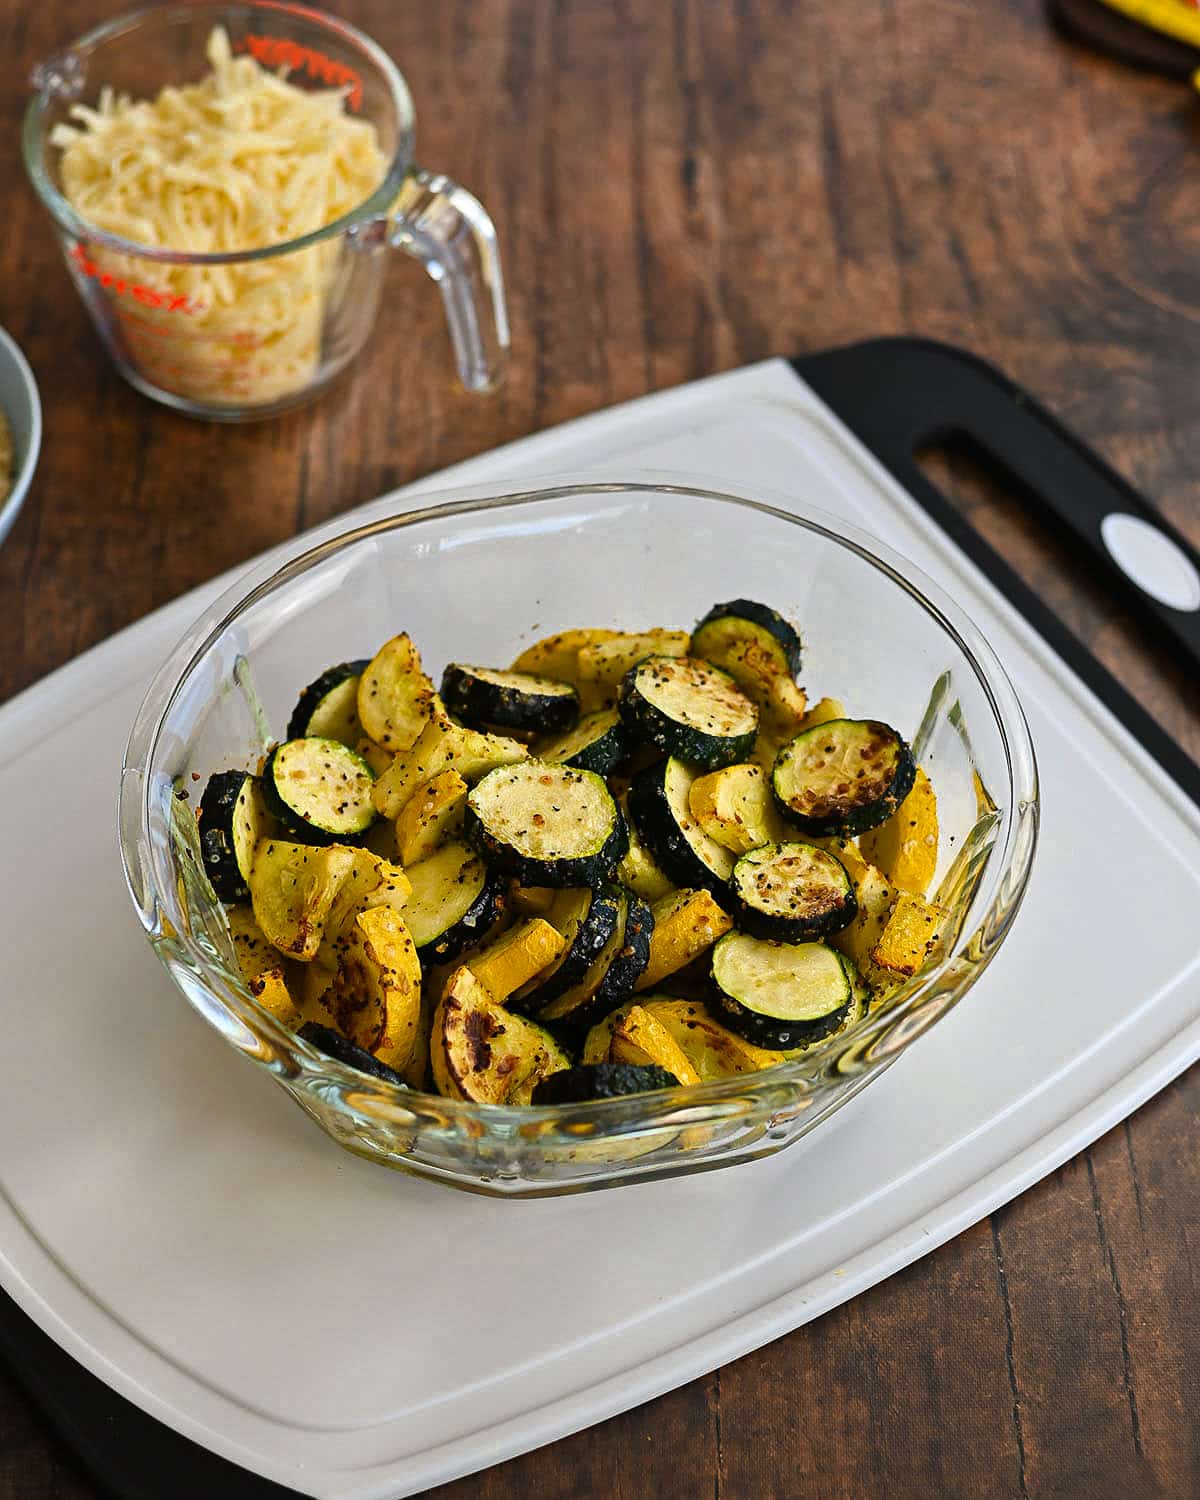 Slightly baked zucchini and yellow squash in a clear casserole dish sitting on a white cutting board.